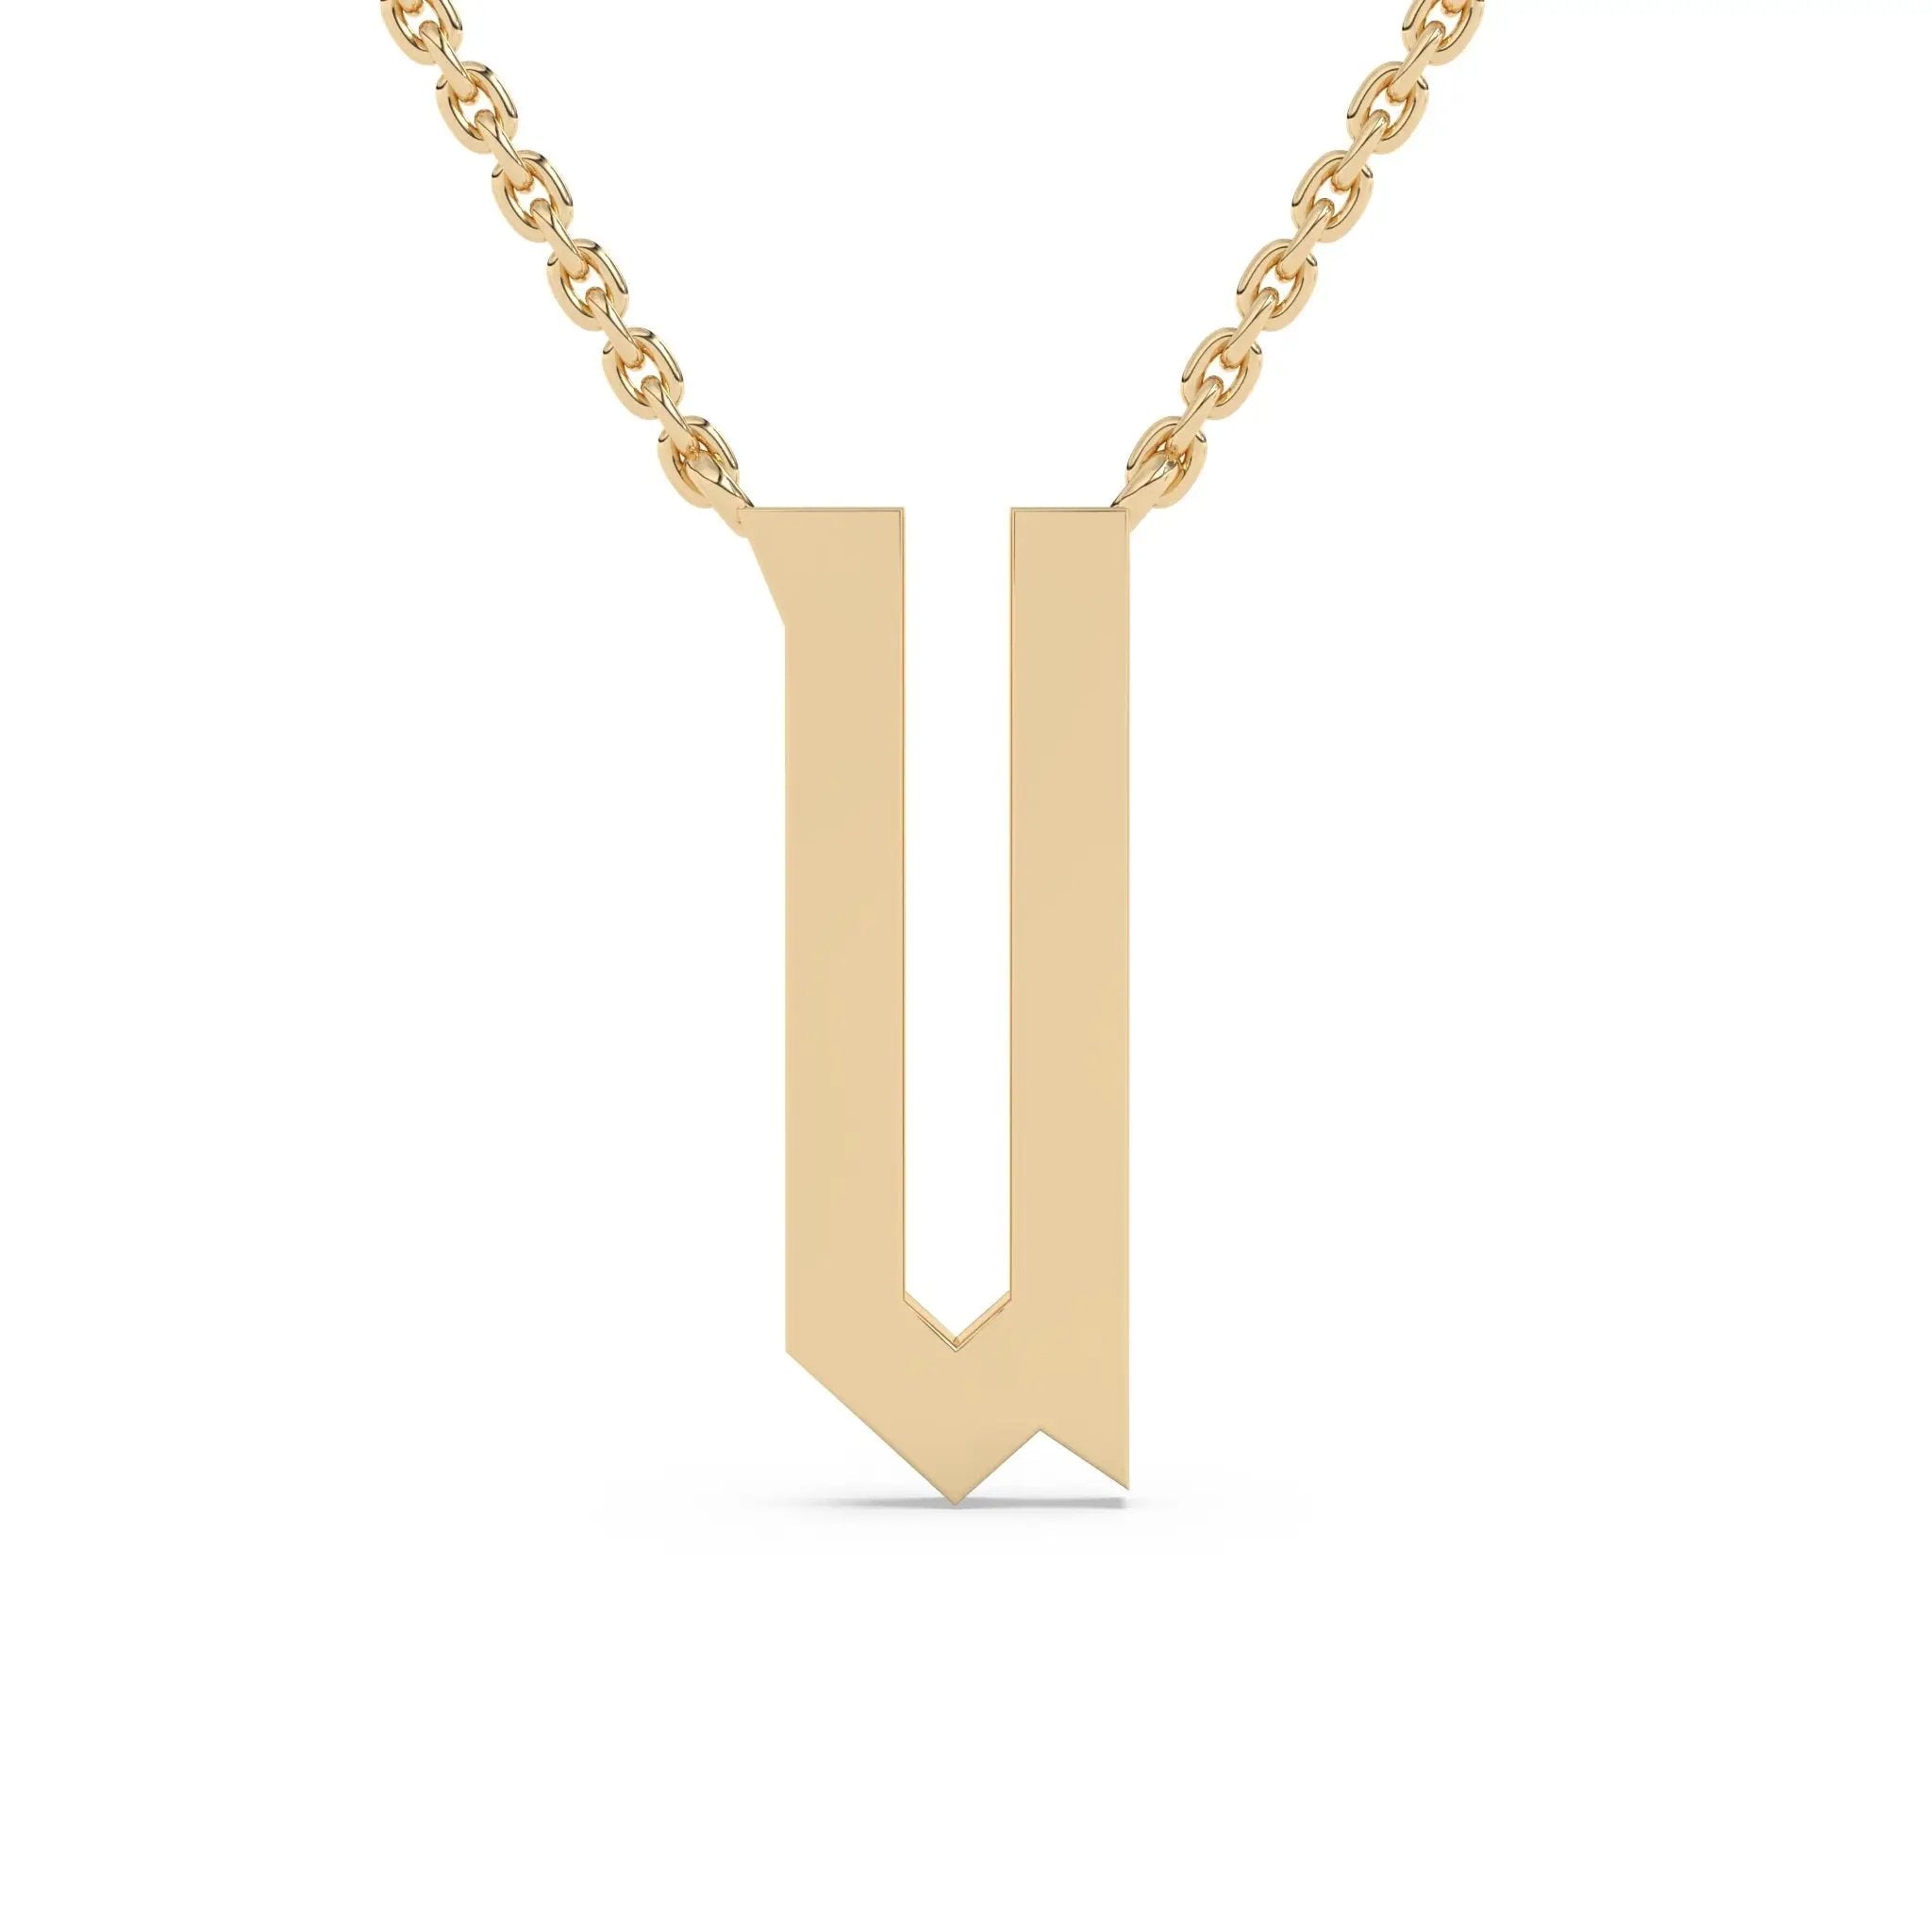 N Bold Initial Gold Necklace | Astrid & Miyu Necklaces